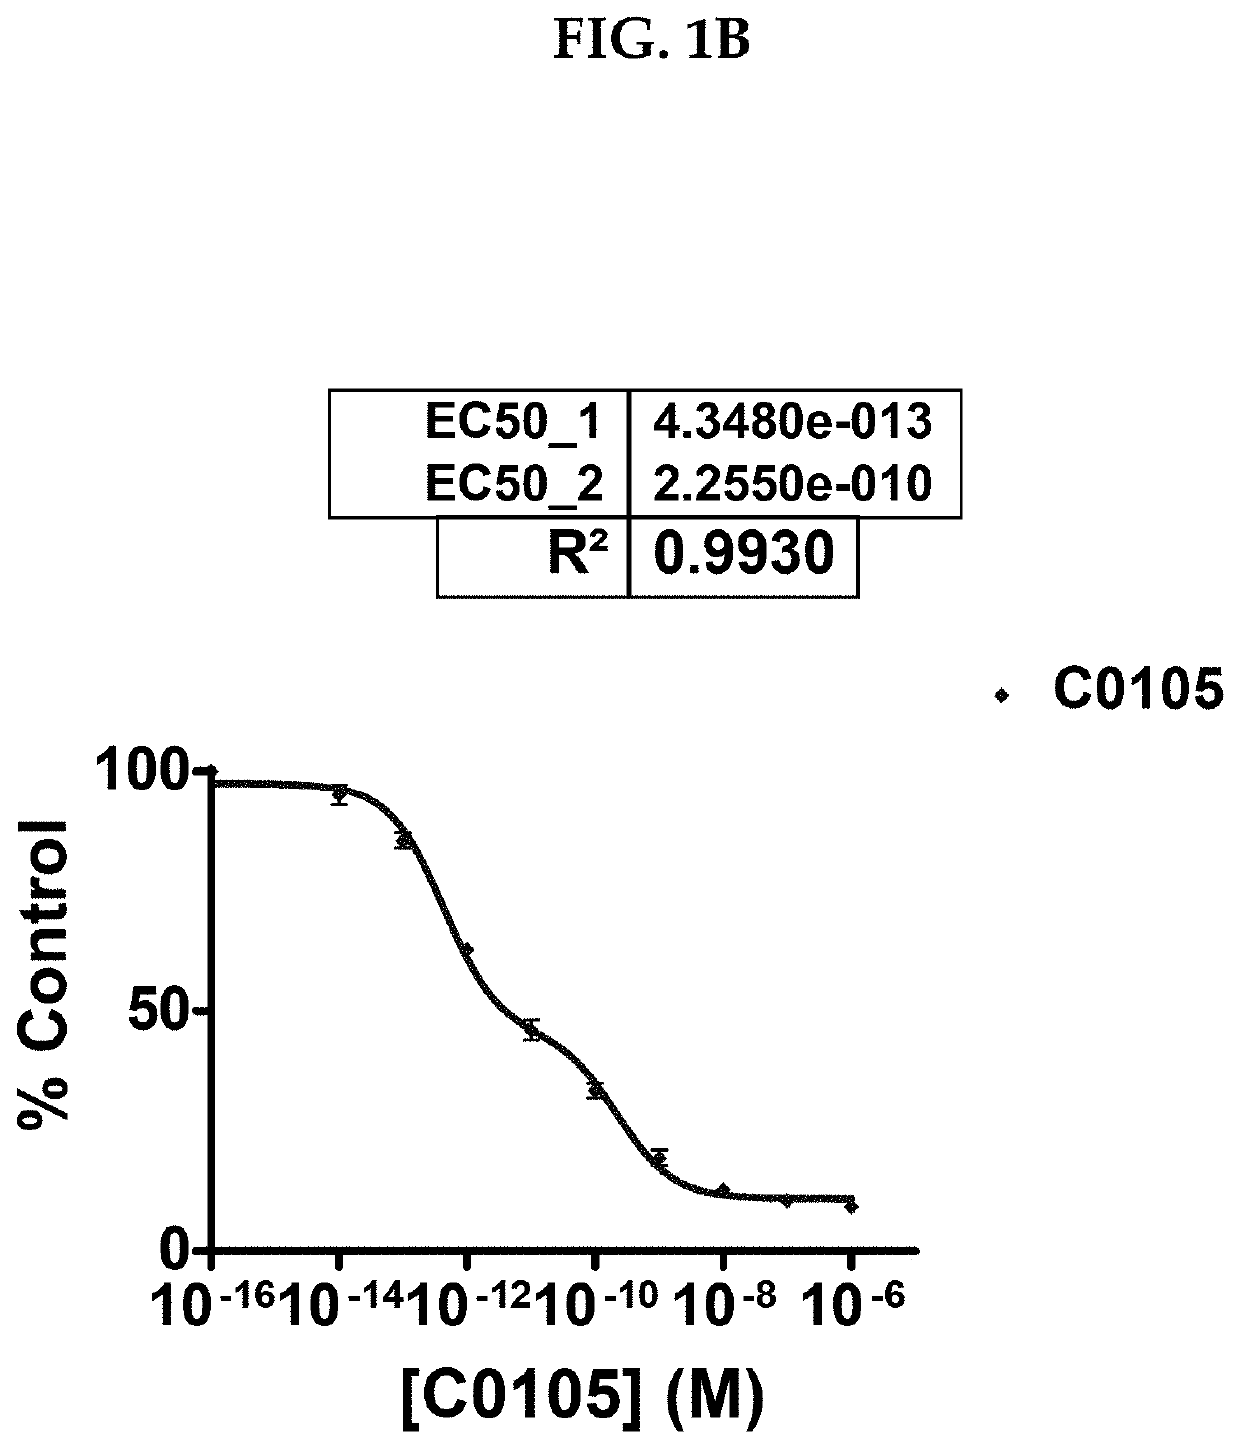 Inhibiting an immune response mediated by one or more of tlr2, rage, ccr5, cxcr4 and cd4